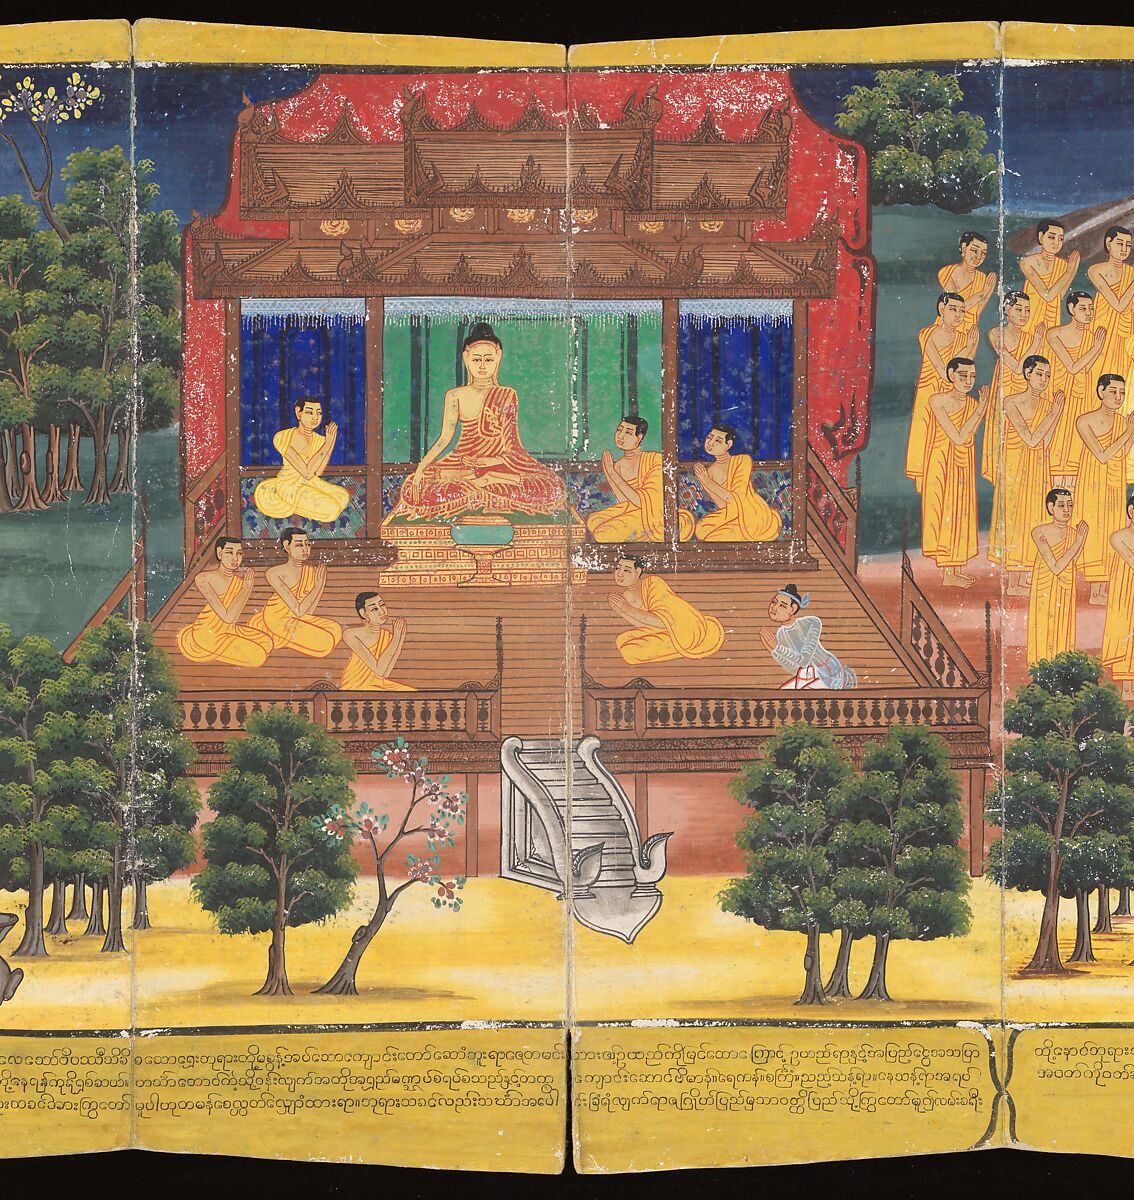 Scenes from Life of the Buddha, Court of King Mindon (Burmese, r. 1853–78), Accordion-fold album (Burmese: parabaik), watercolors, ink and gold on mulberry bark paper, with tooled leather boards, Myanmar (Burma), Mandalay 